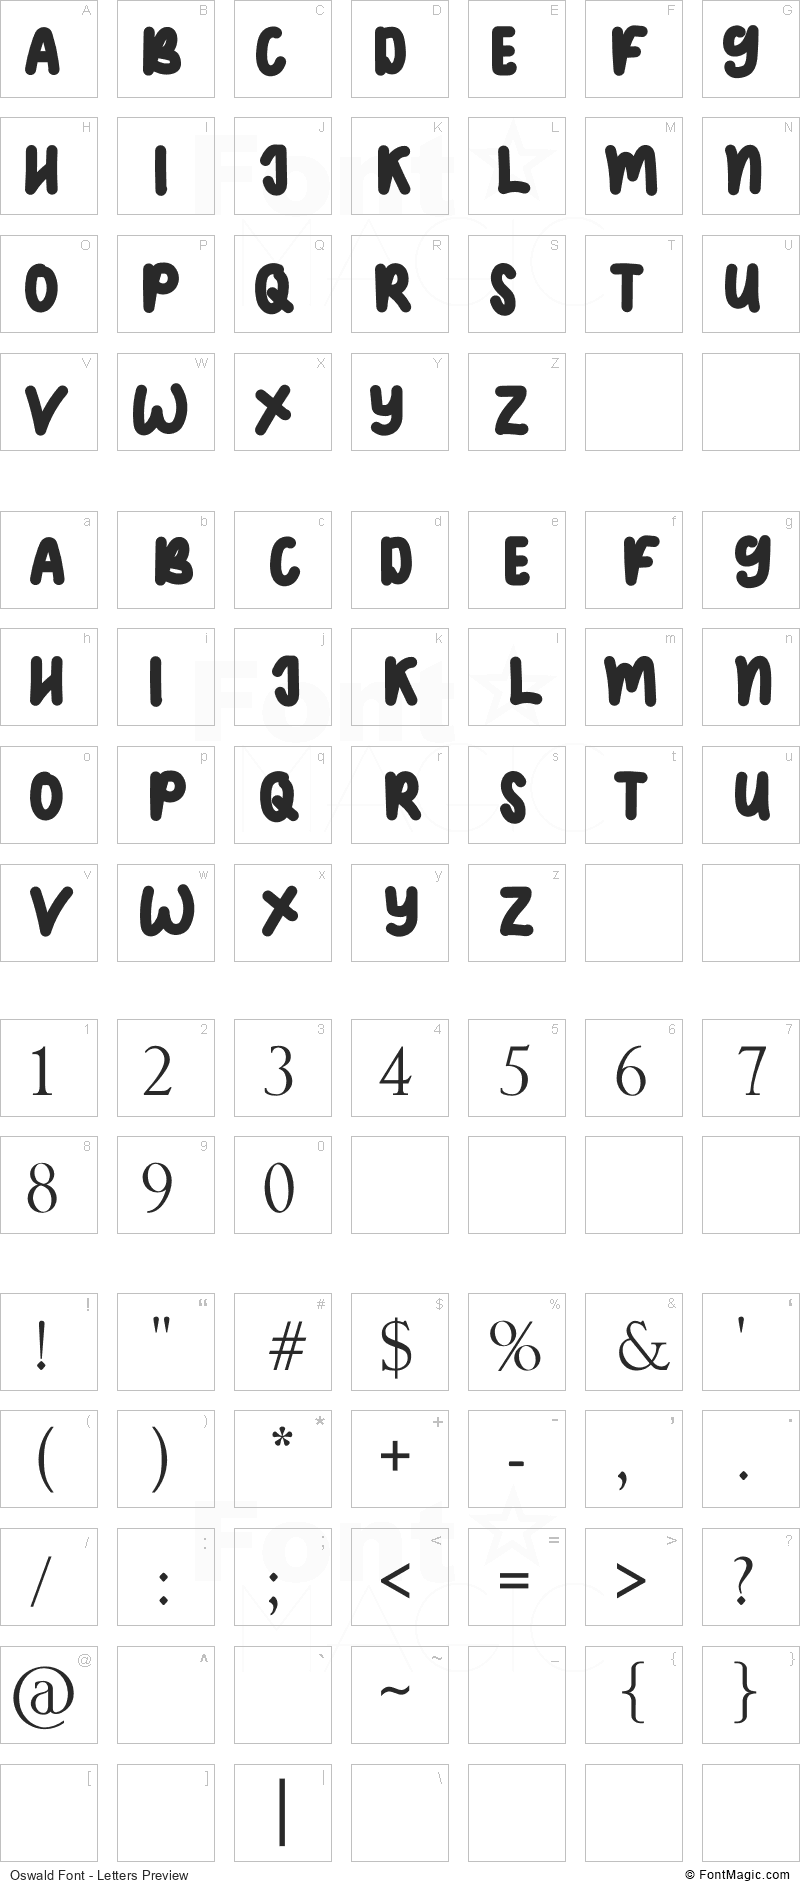 Oswald Font - All Latters Preview Chart